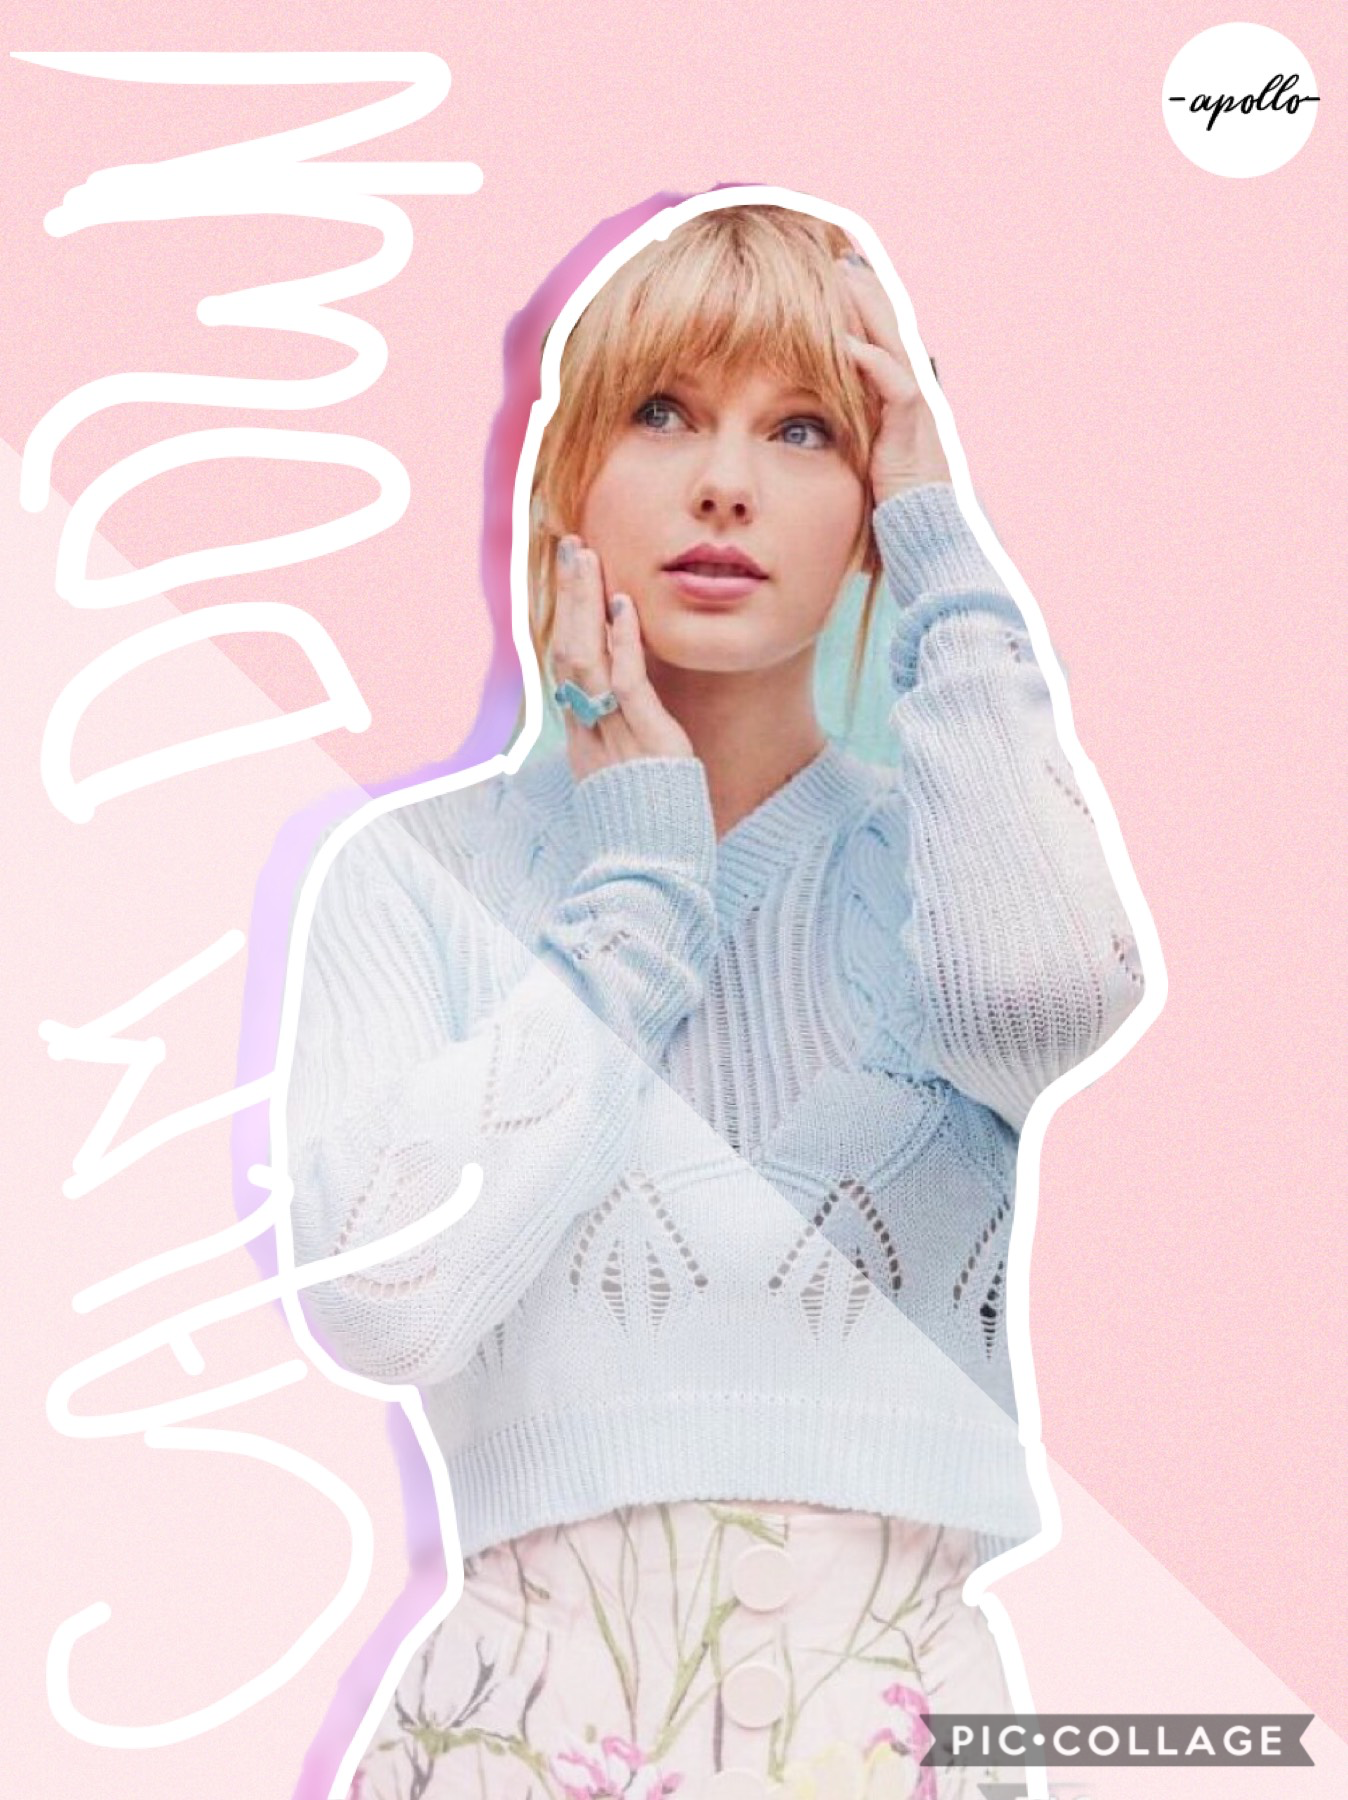 🌸TAP🌸

Hey asteroids💫💫 hope y’all like this edit😍 comment other celebs I could do for this style. I decided I’ll do a new style every other week so yah👌🏻 I think I’m gonna post daily unless I actually can’t but y’all get the idea❤️❤️